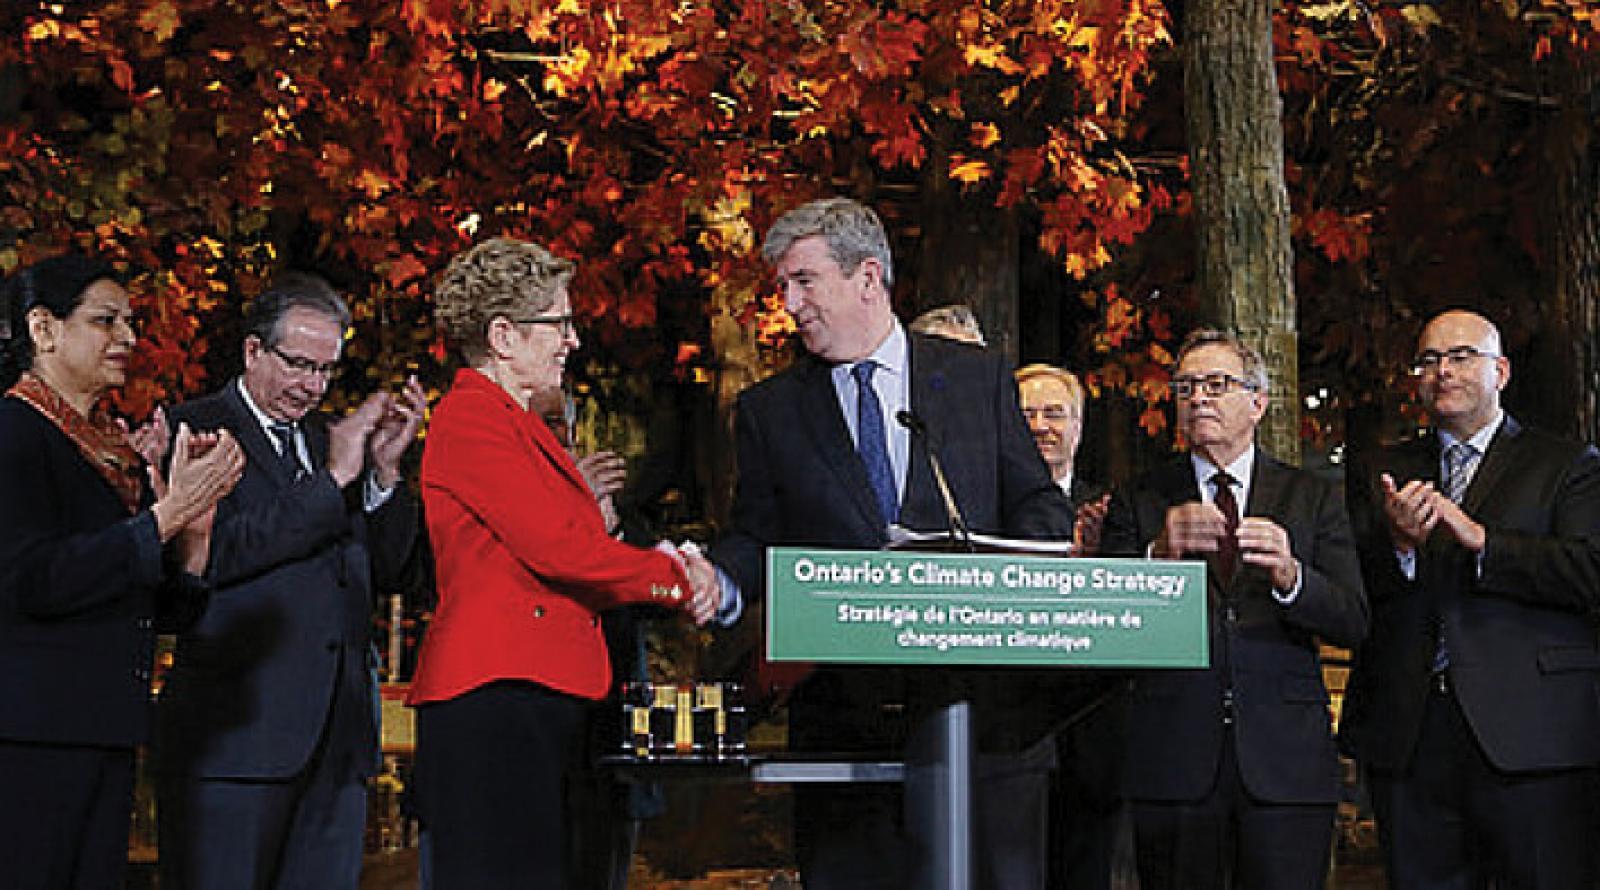 Ontario Premier Kathleen Wynne and Minister of the Environment and Climate Change Glen Murray announce the provincial Climate Change Strategy.